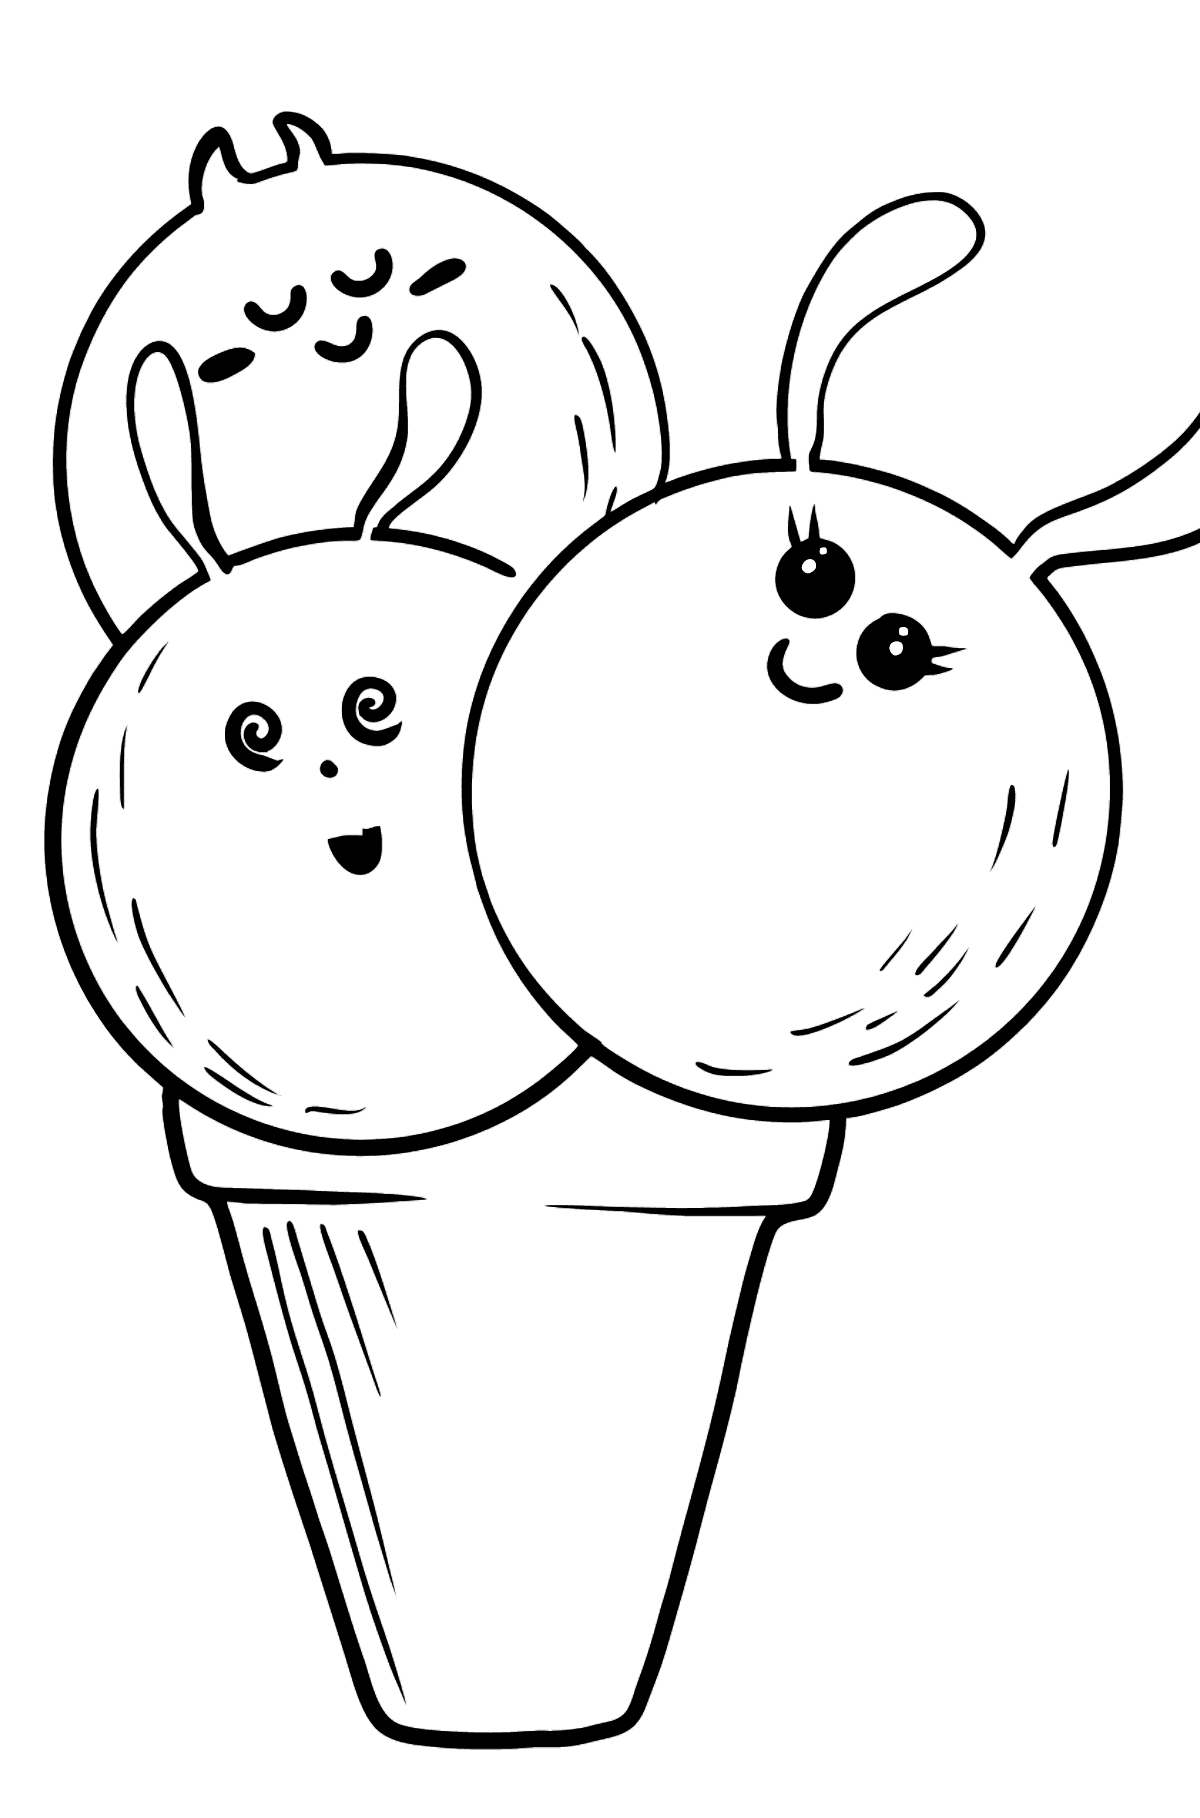 Kawaii Ice Cream - Apple and Raspberry coloring page - Coloring Pages for Kids